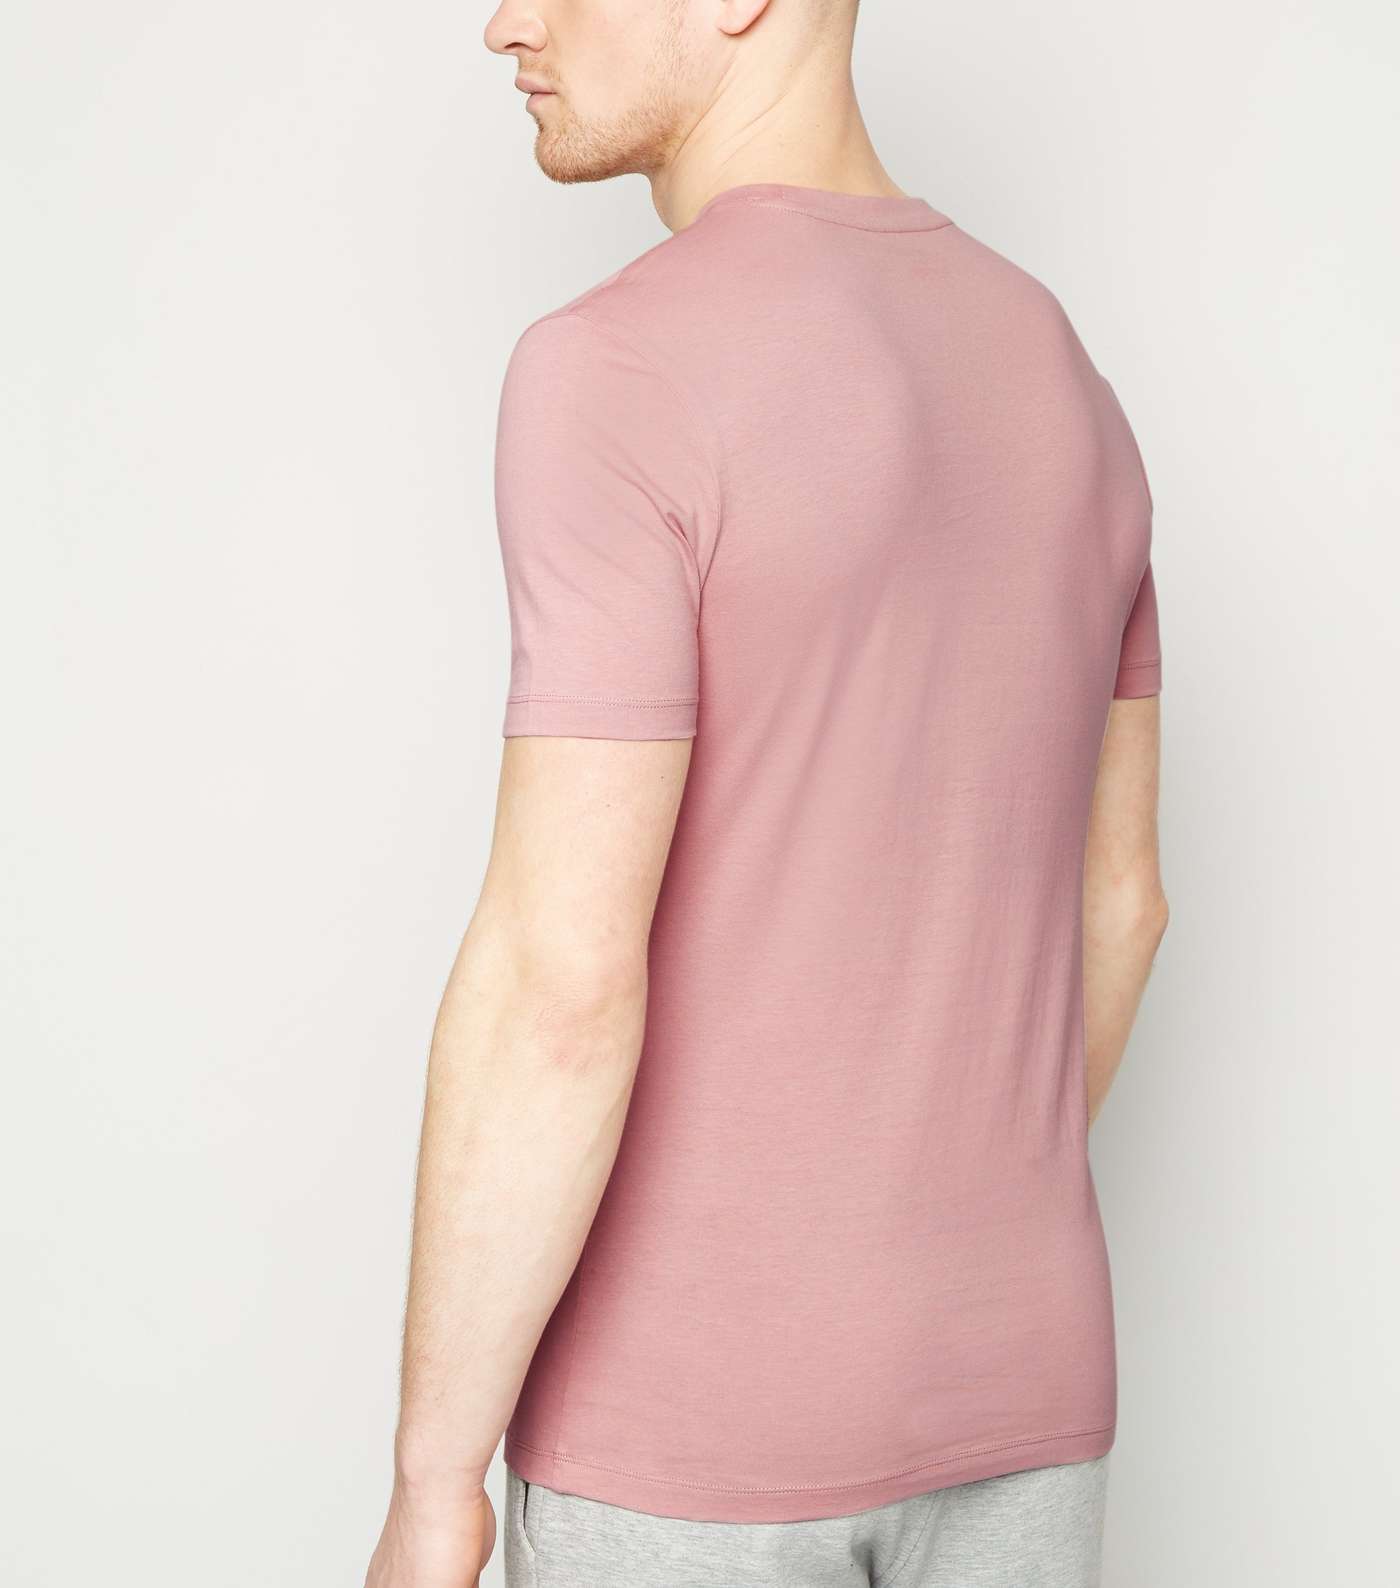 Mid Pink Muscle Fit Cotton T-Shirt Image 3